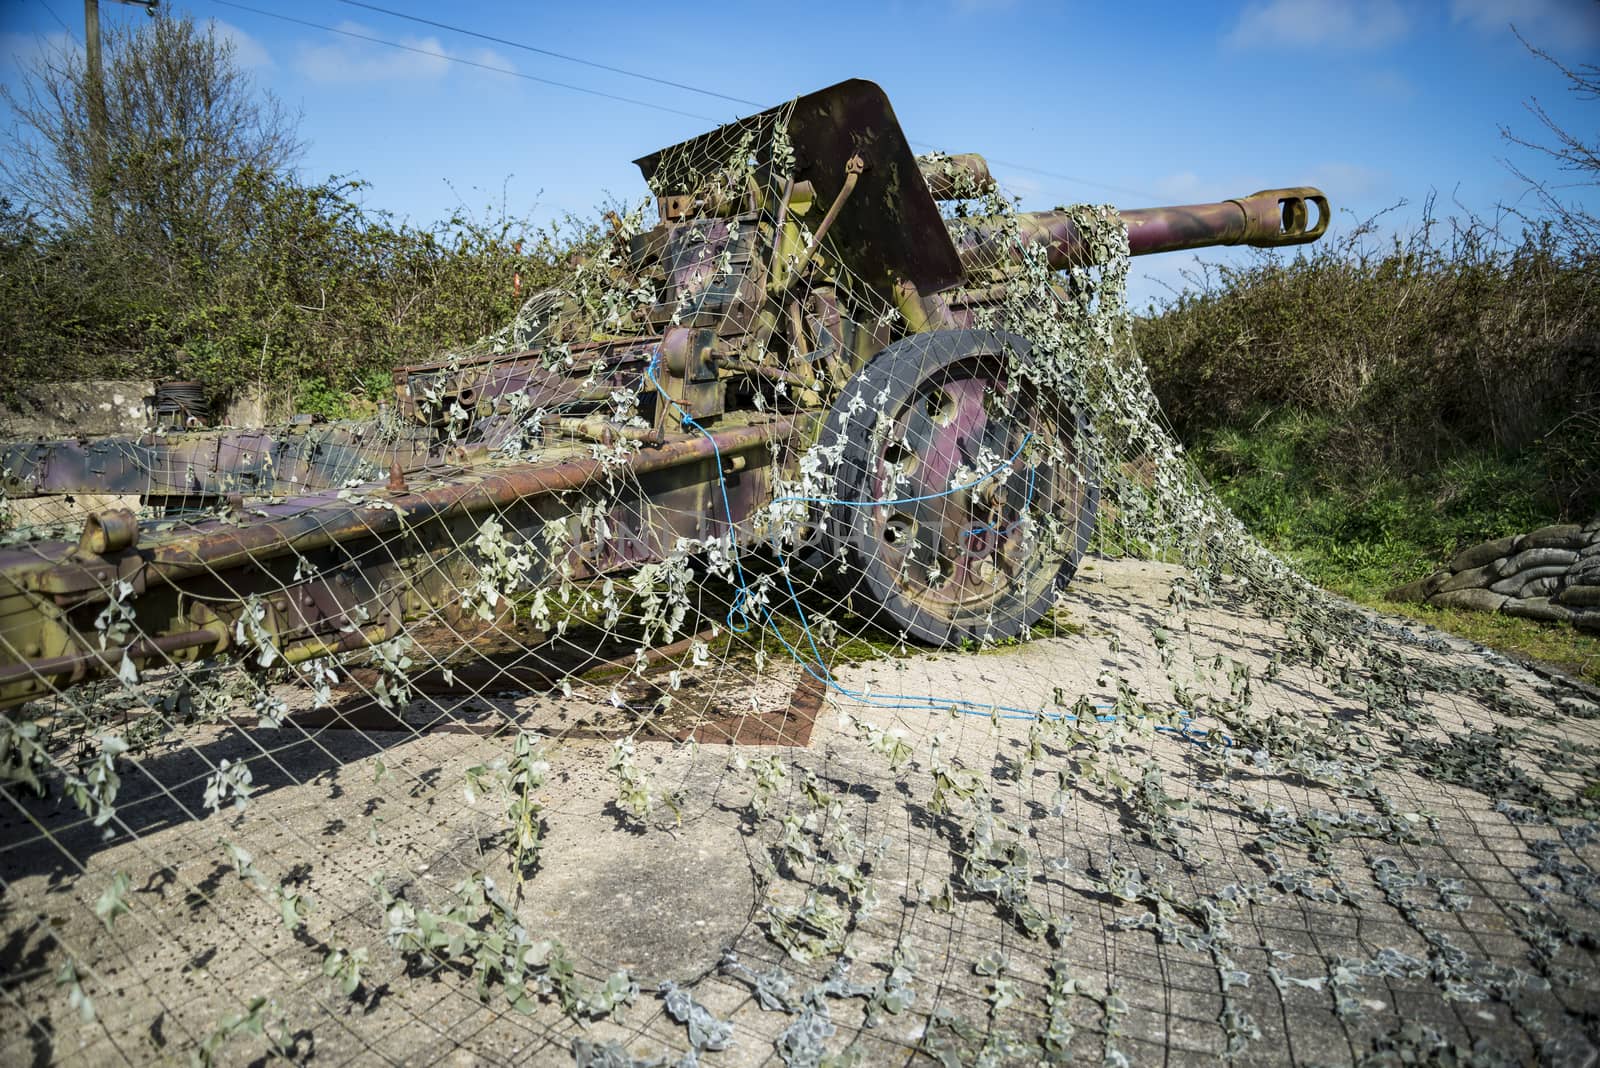 WWII German battery in Maisy, Normandy, France. Remains of D-Day invasion on June 6, 1944